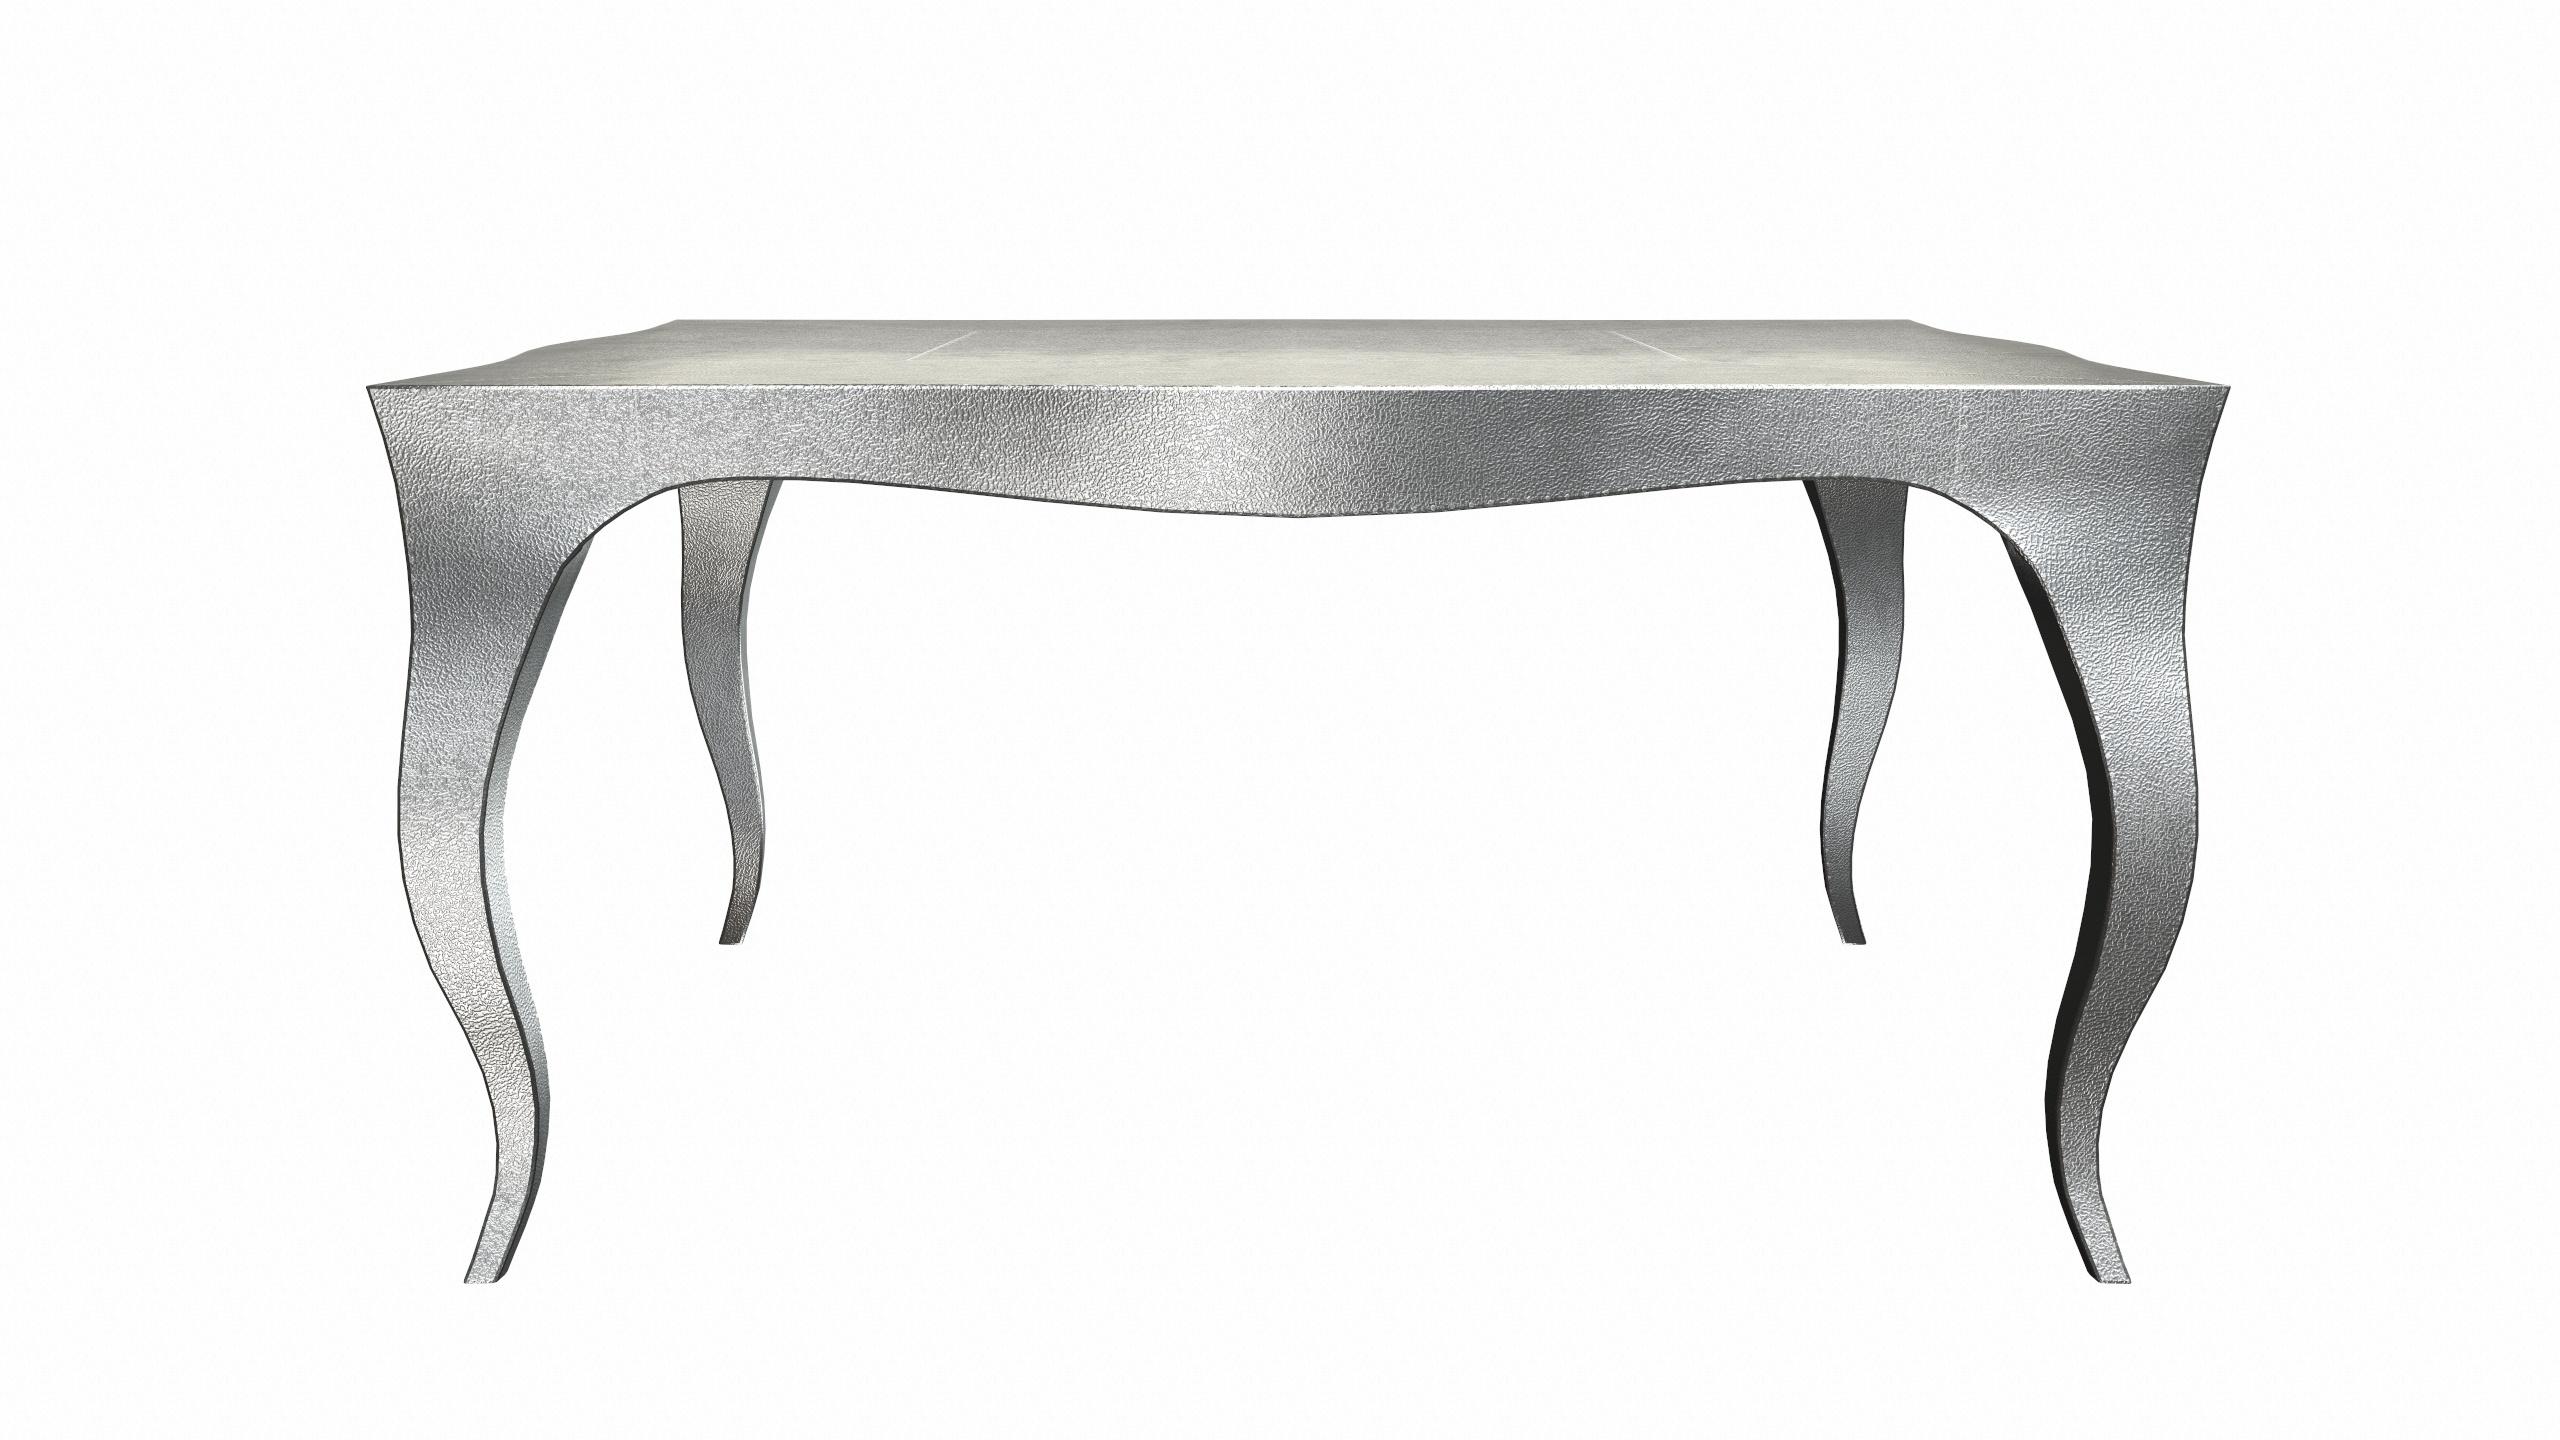 American Louise Art Deco Industrial Tables Fine Hammered White Bronze 18.5x18.5x10 inch For Sale